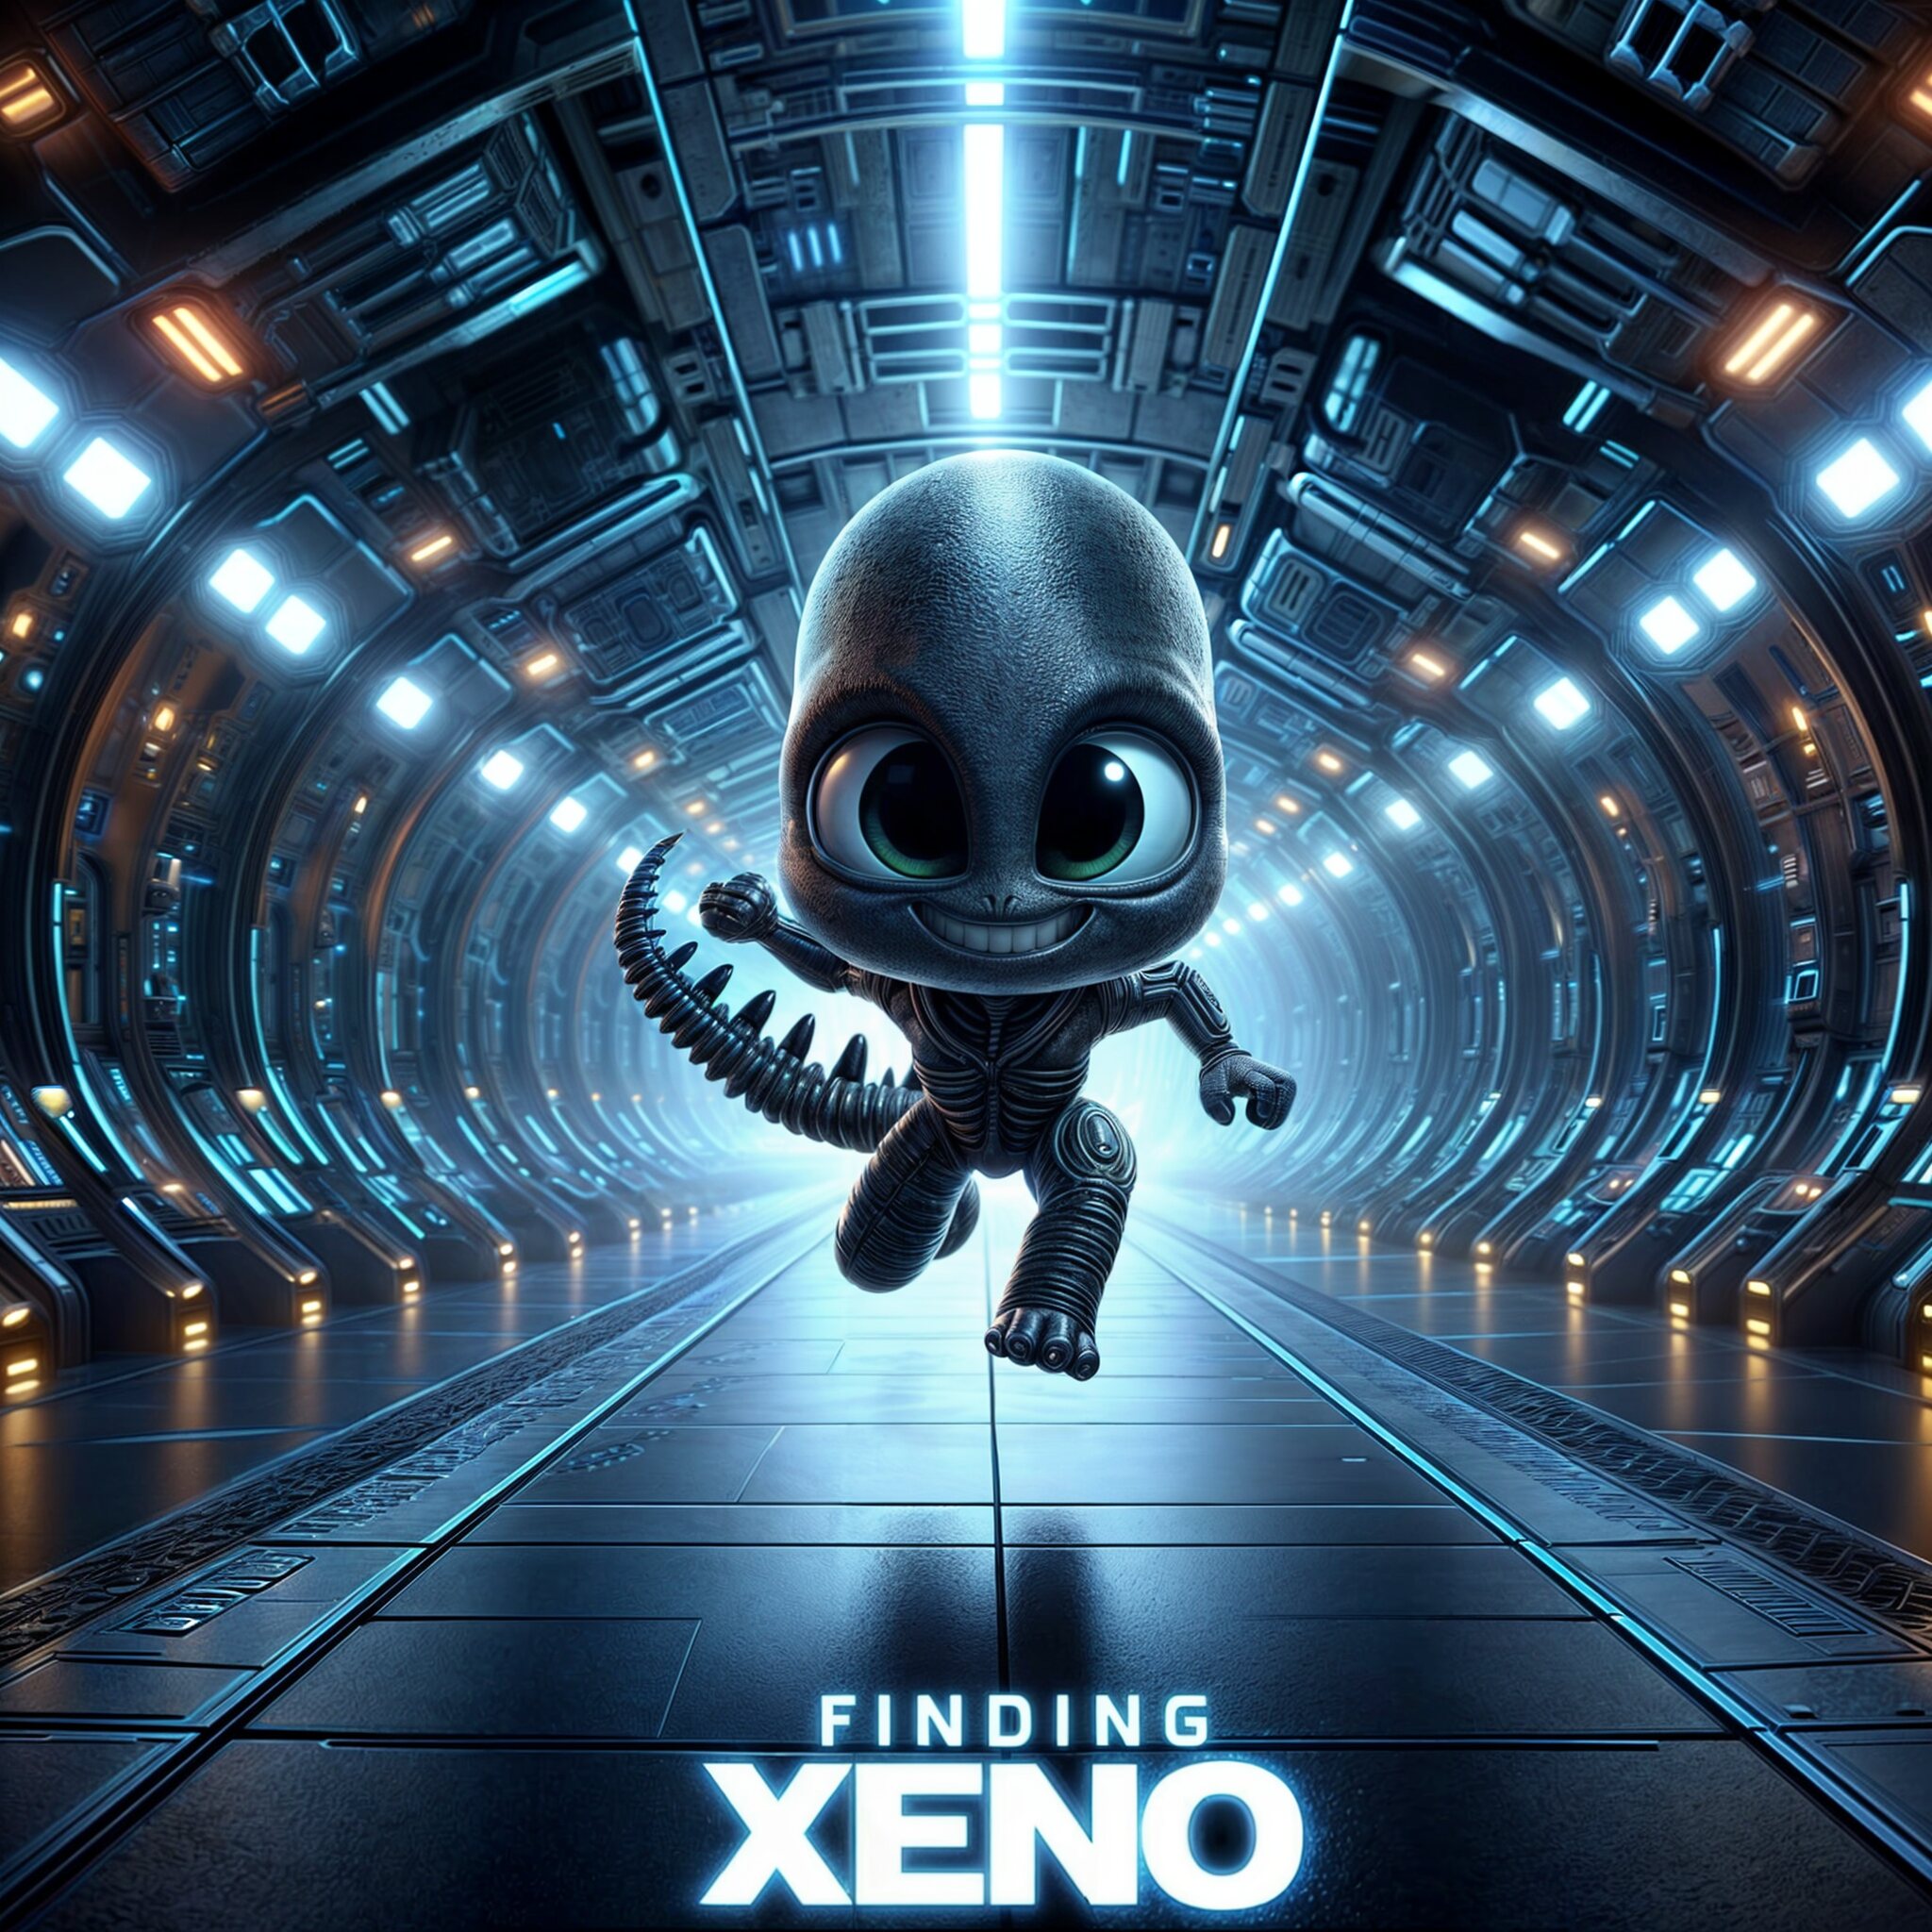 Pistonheads - The image is a promotional poster for the movie "Xeno." It features an animated character in the center of a corridor with futuristic designs, running towards the camera with a joyful expression. The corridor has glowing lights and metallic walls, indicative of advanced technology or an alien environment.